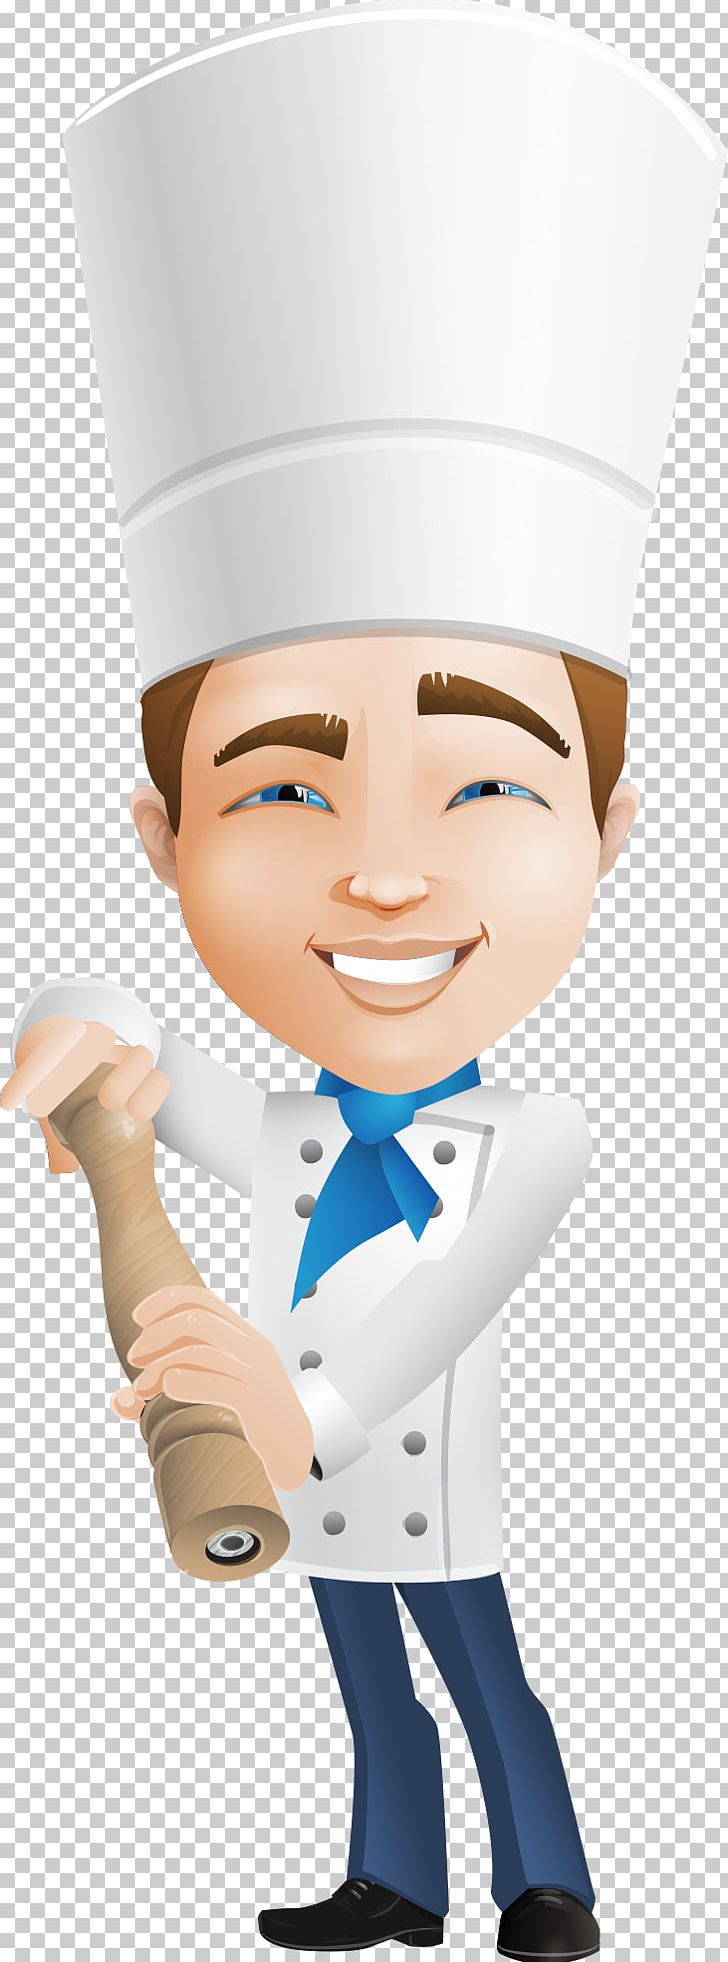 Chef Character Cartoon PNG, Clipart, Balloon Cartoon, Boy Cartoon, Cartoon, Cartoon Character, Cartoon Chef Free PNG Download